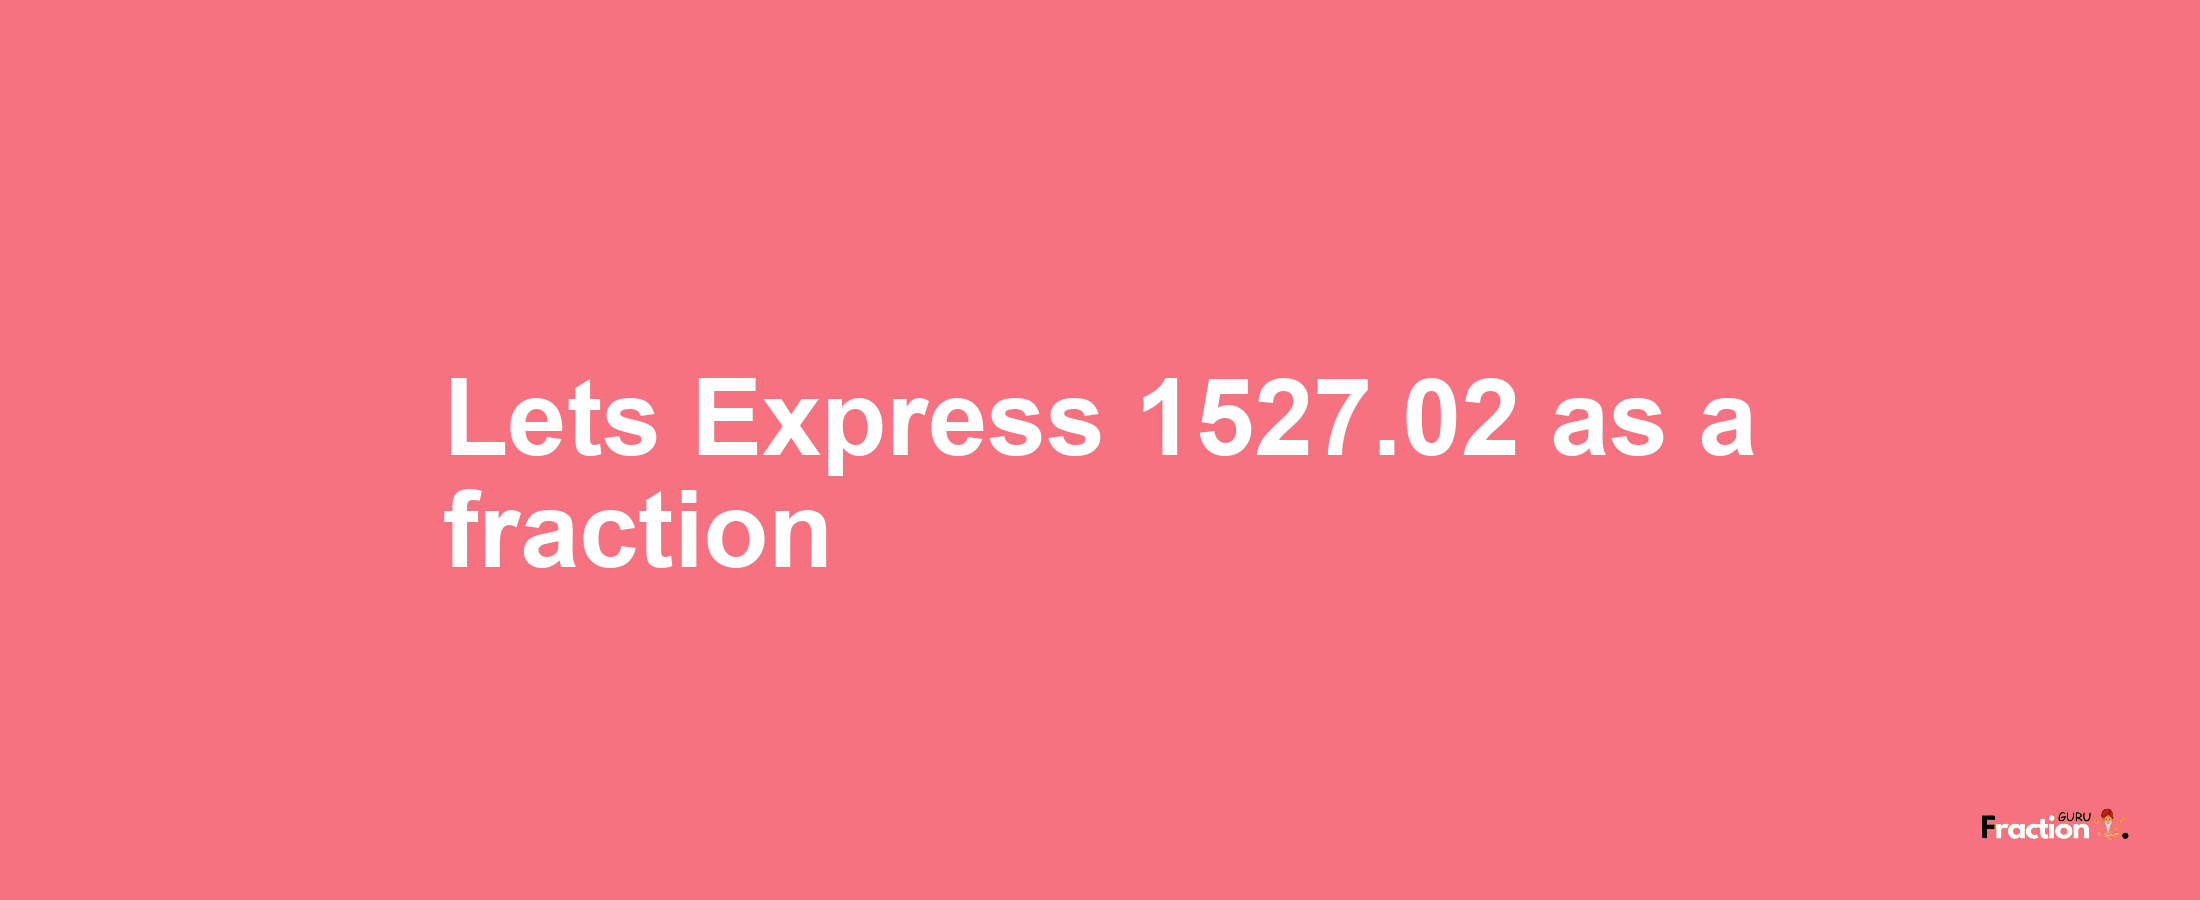 Lets Express 1527.02 as afraction